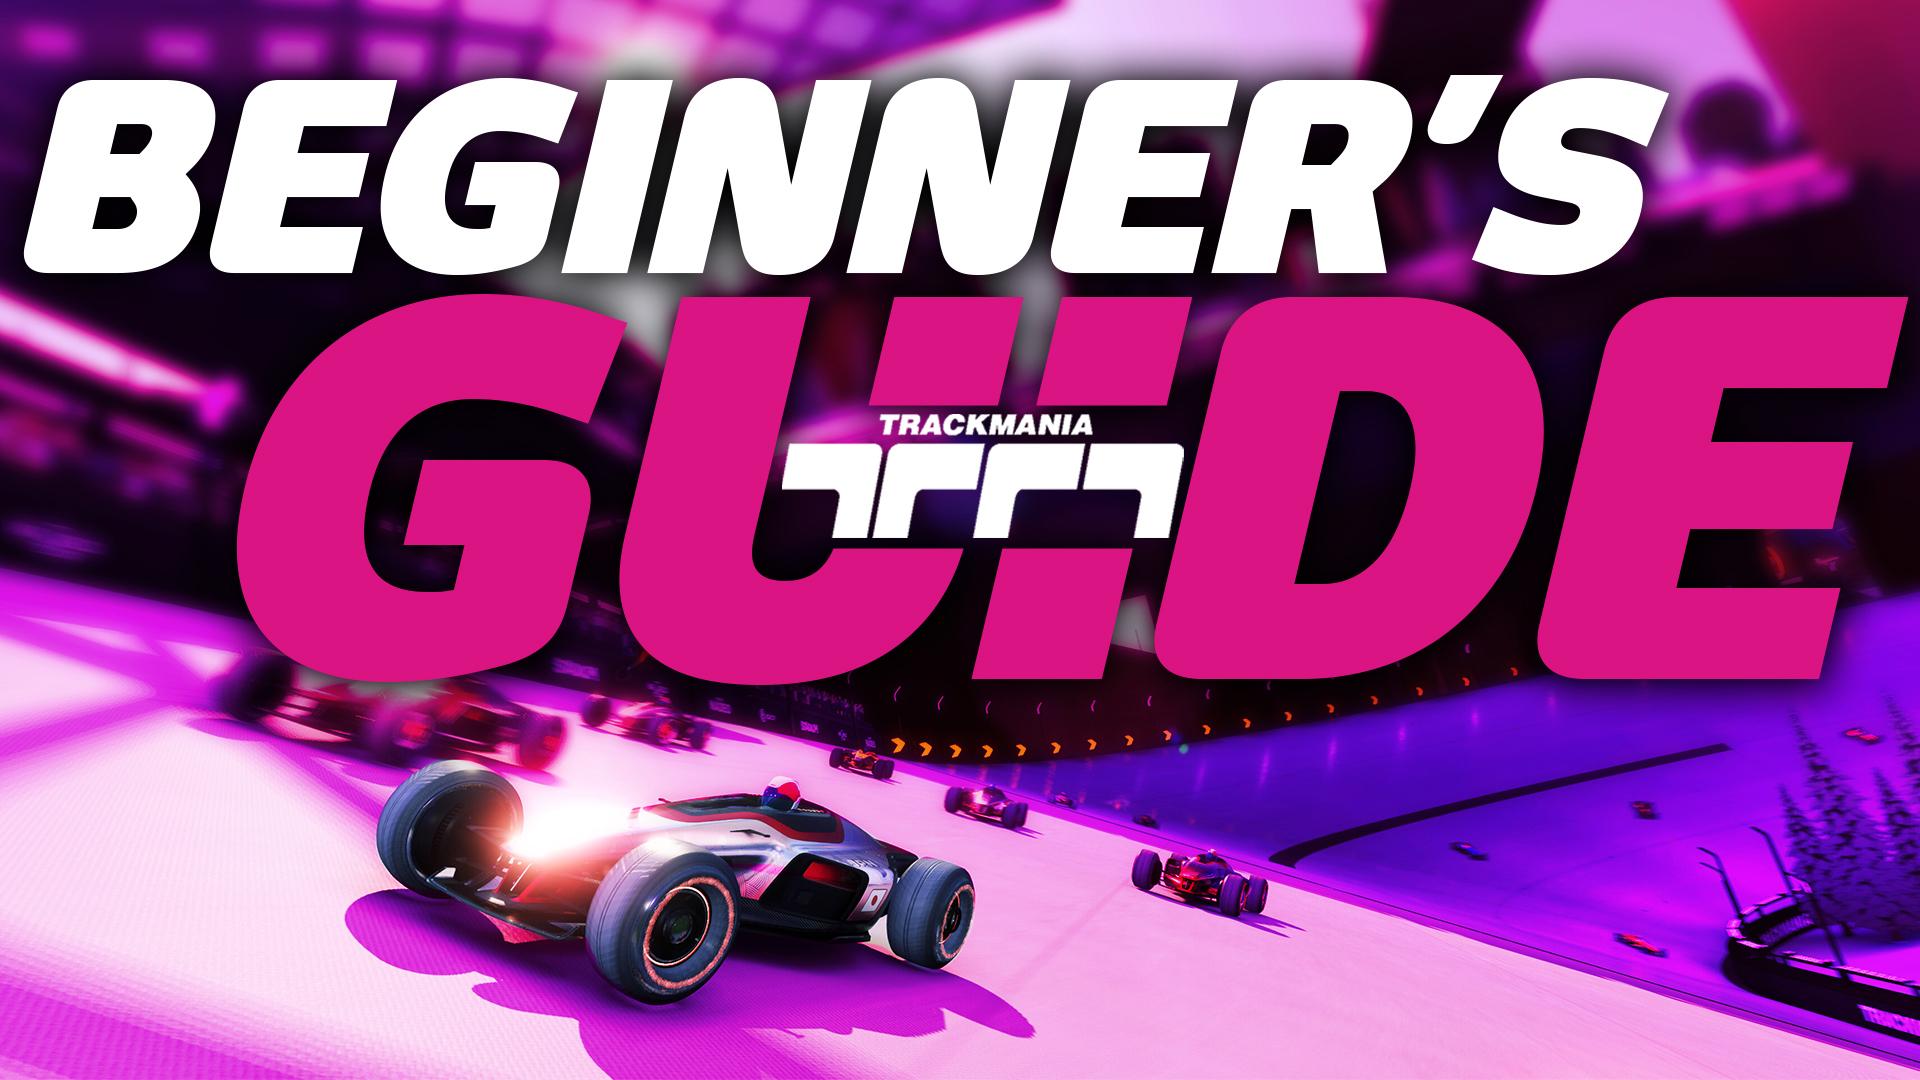 A beginner's guide to Trackmania